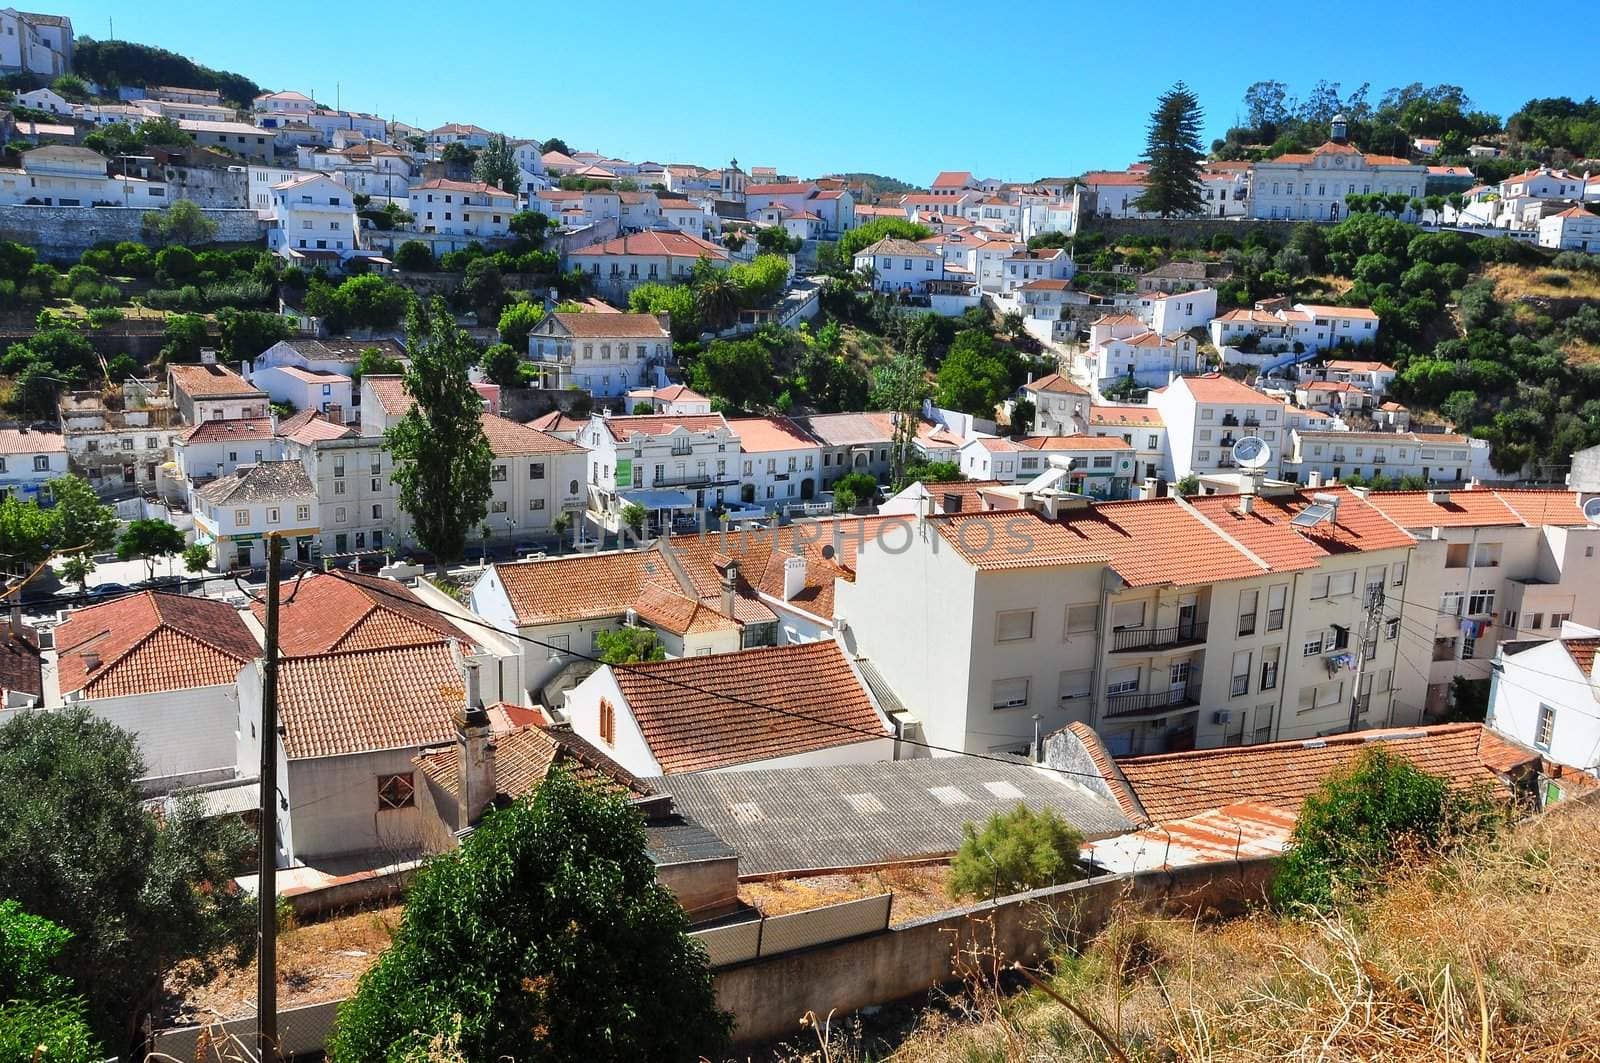 Old town,village on the hillside in Portugal